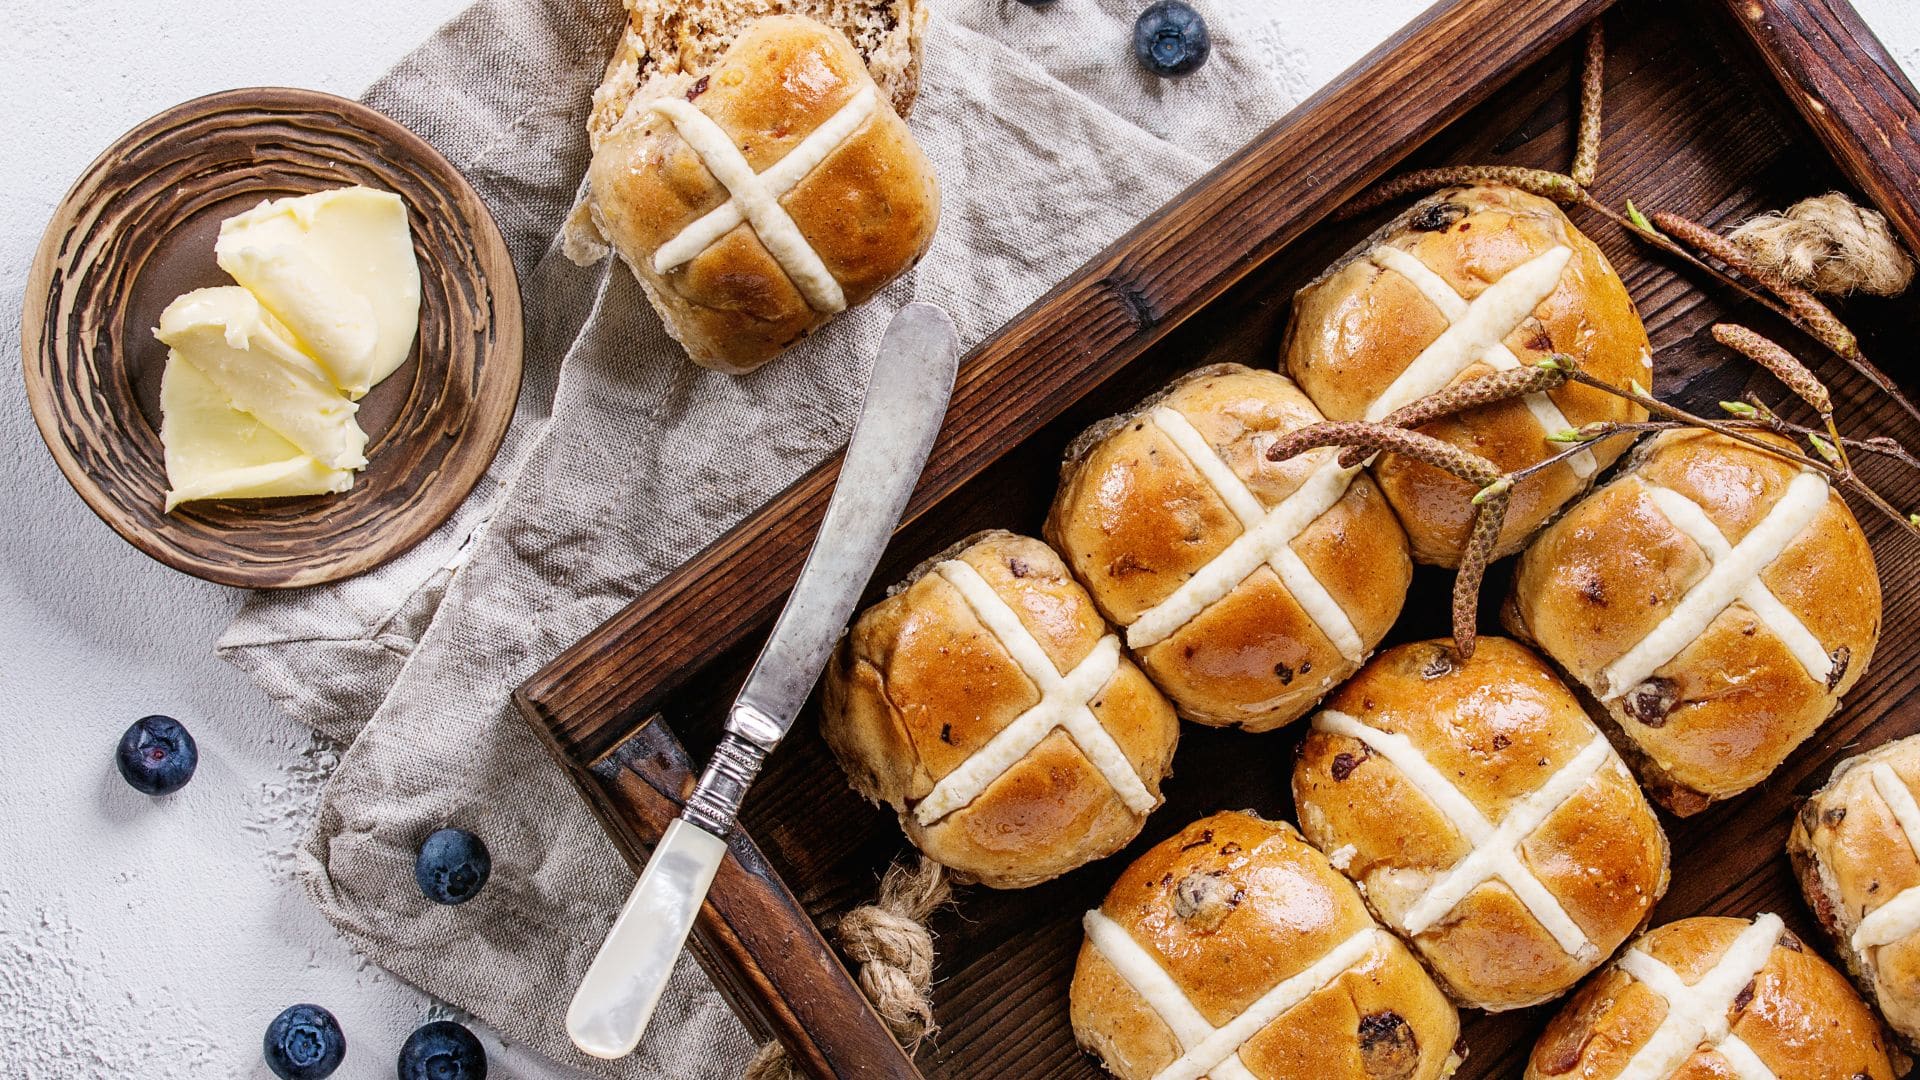 A batch of freshly baked hot cross buns sit on a table with a plate of butter and blueberries.